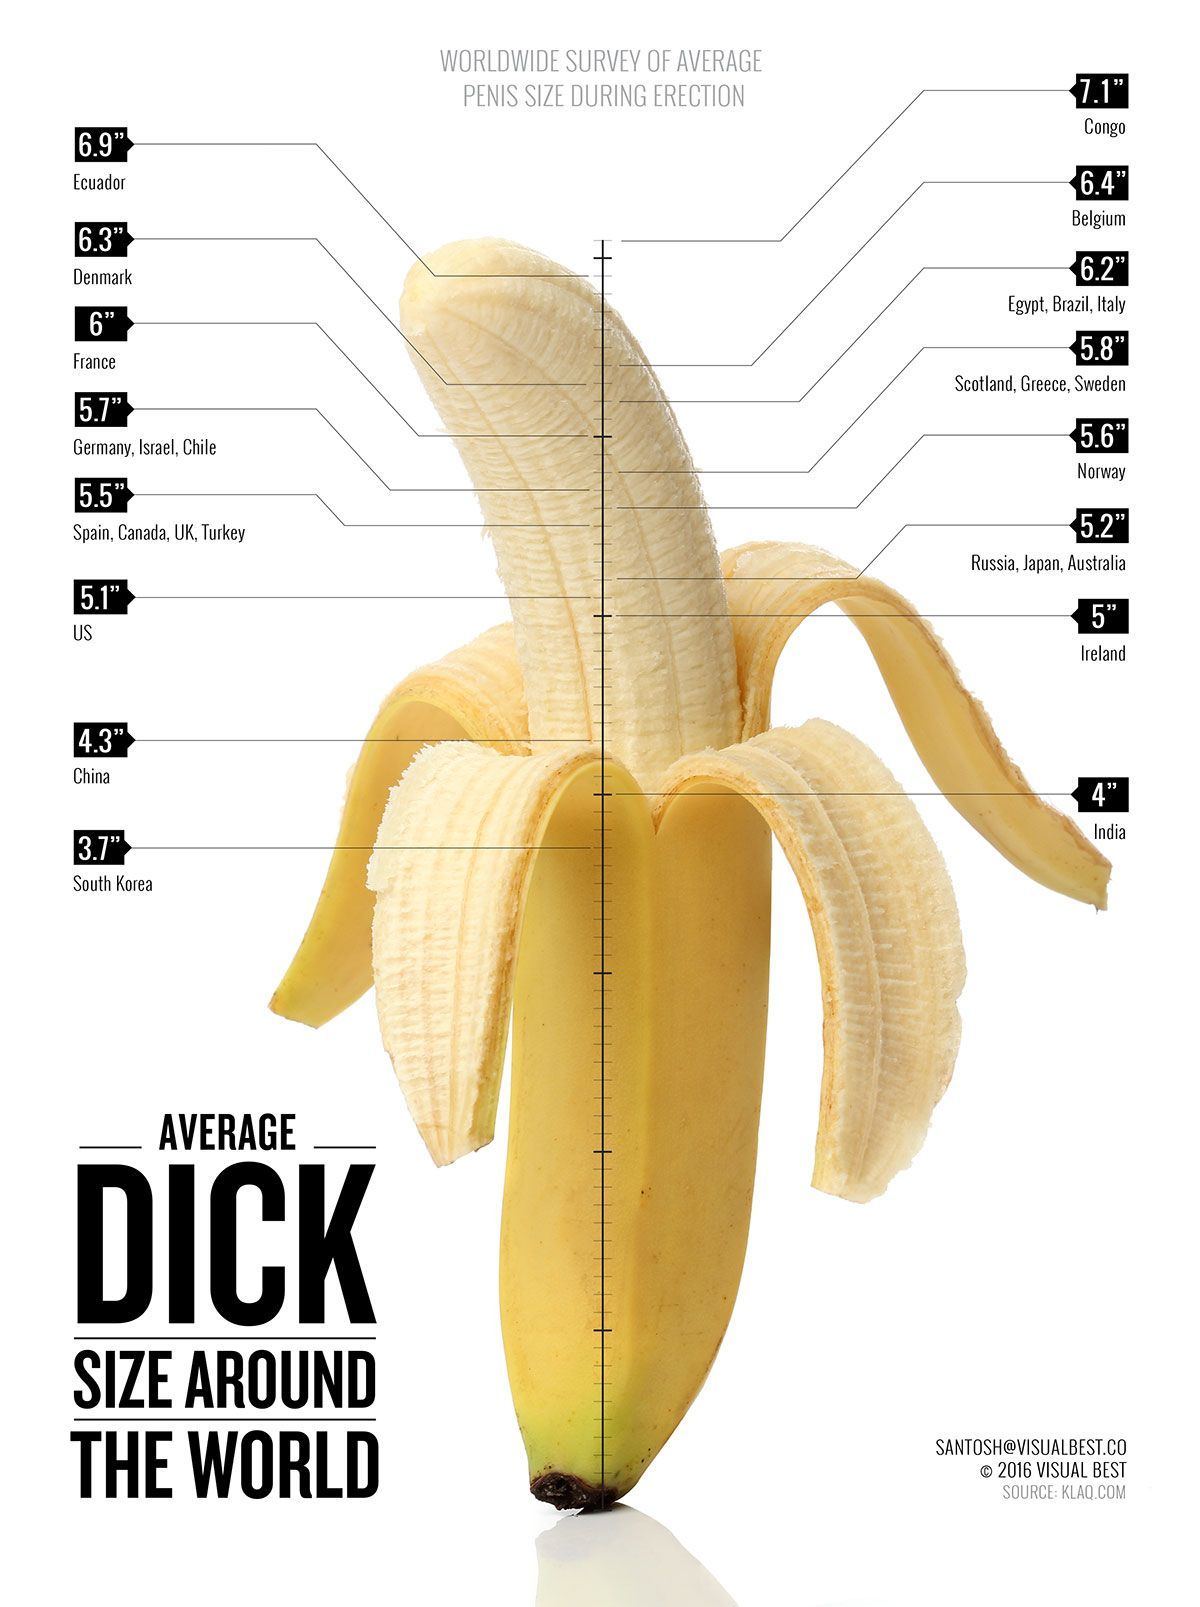 What is the average dick length